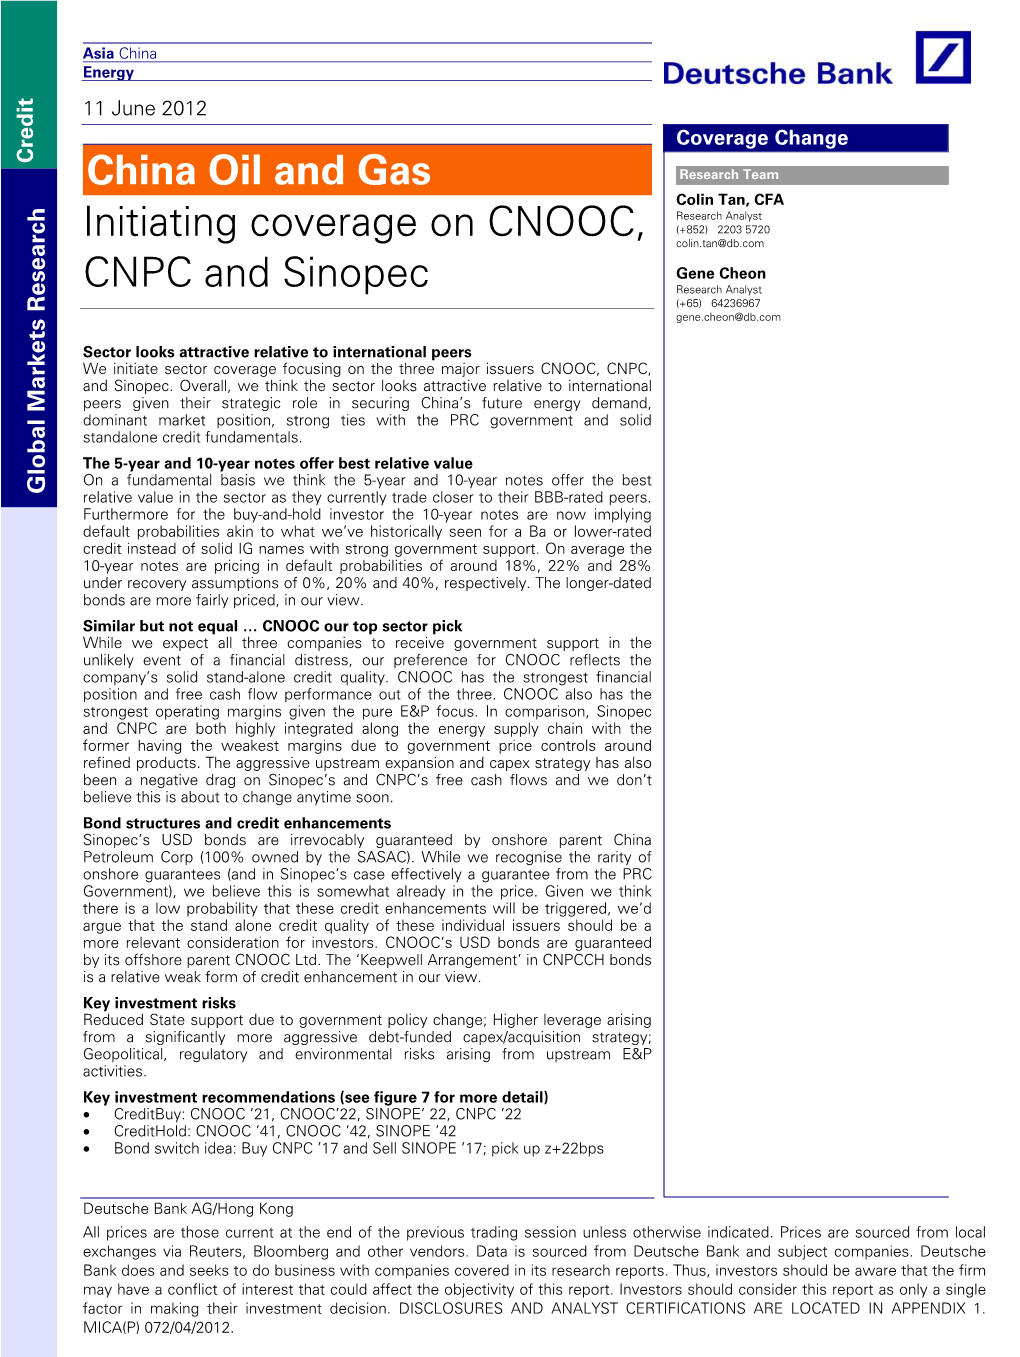 China Oil and Gas Initiating Coverage on CNOOC, CNPC and Sinopec